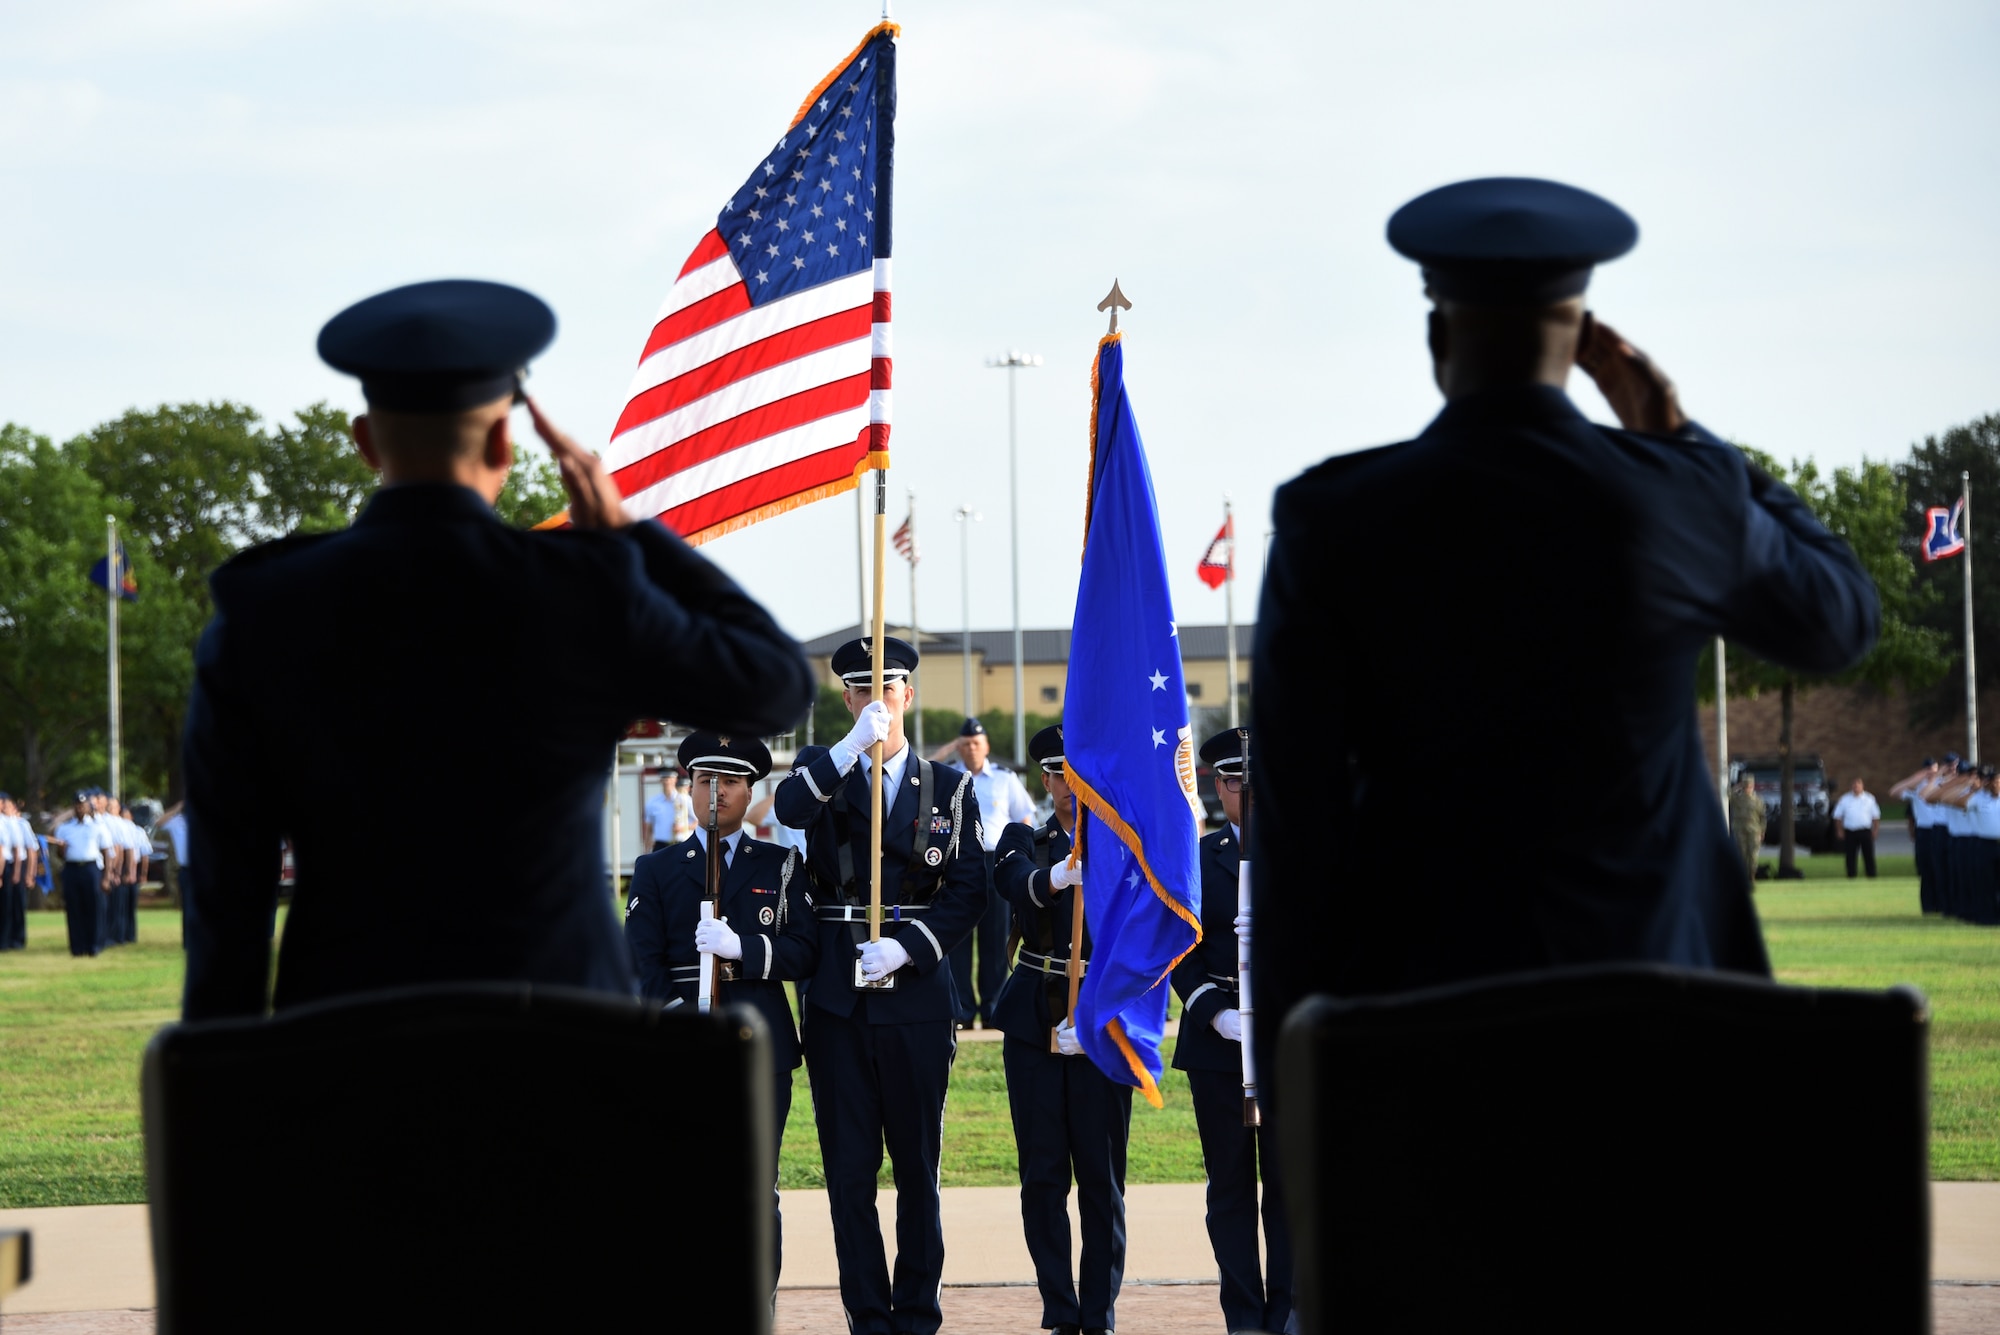 Brig. Gen. Lyle K. Drew, 82nd Training Wing incoming commander, and Brig. Gen. Kenyon K. Bell, 82nd TRW outgoing commander, render a salute during the national anthem at the Wing change of command ceremony, at Sheppard Air Force Base, Texas, July 15, 2021,. Maj. Gen. Andrea Tullos, 2nd Air Force commander, officiated the ceremony which gave the reins to the 82nd TRW to Drew.  Drew said he was replacing Bell, but following in his footsteps. (U.S. Air Force photo by Staff Sgt. Robert L. McIlrath)